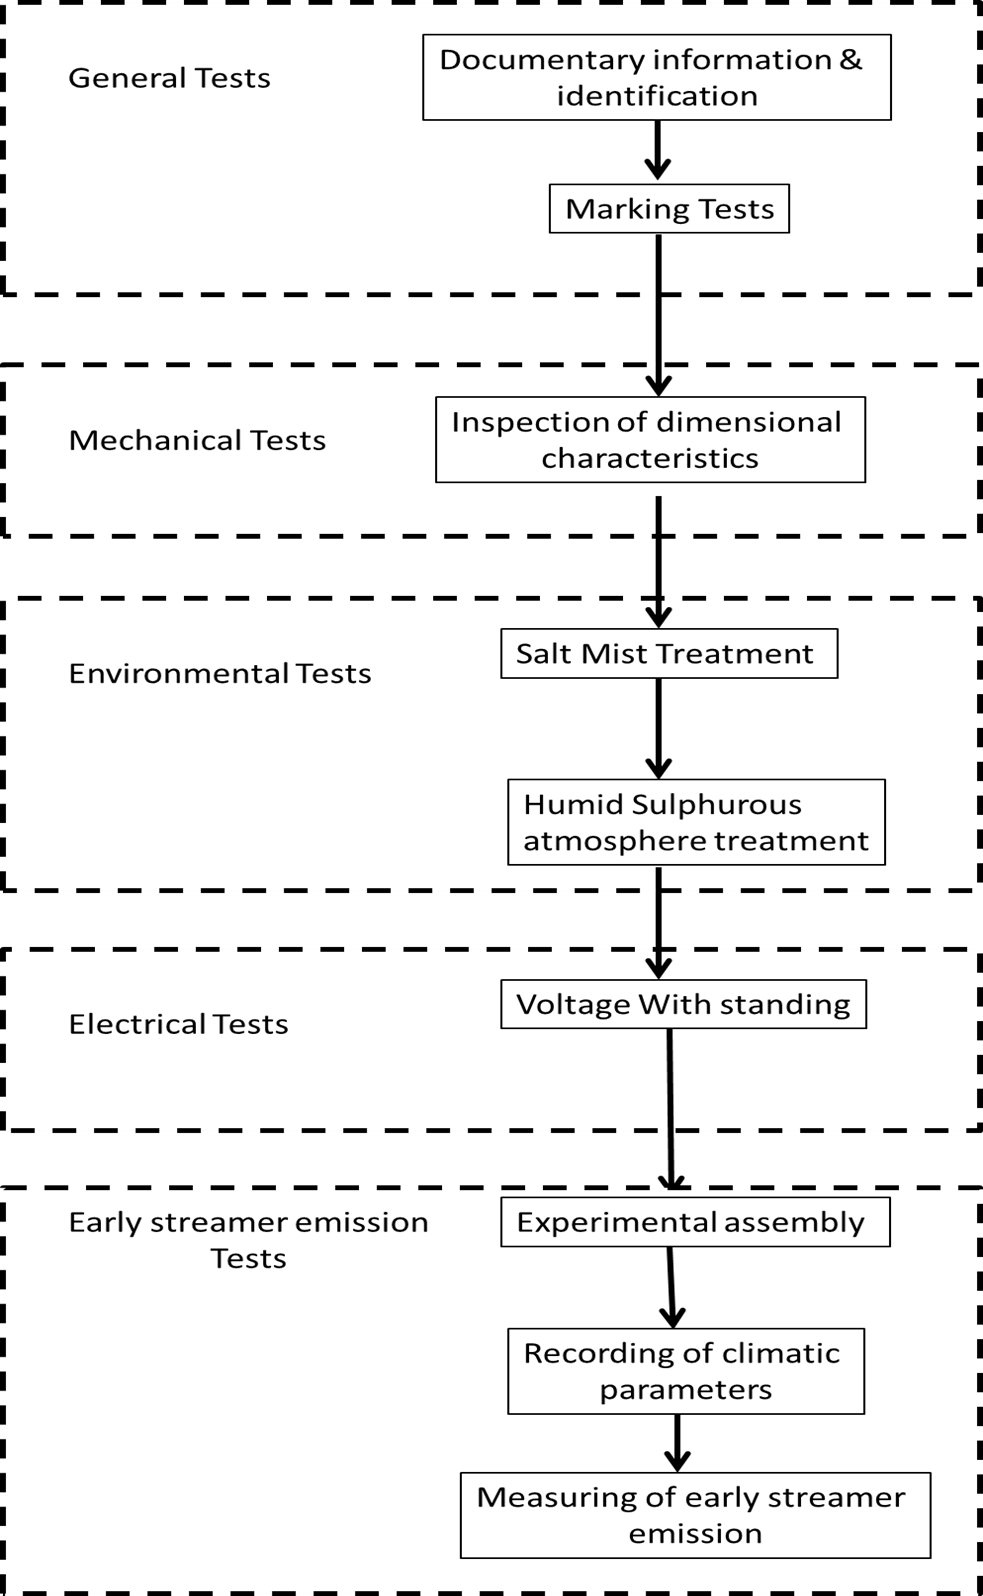 The flowchart shows the sequence of tests to be followed in an ESE Air Terminal.